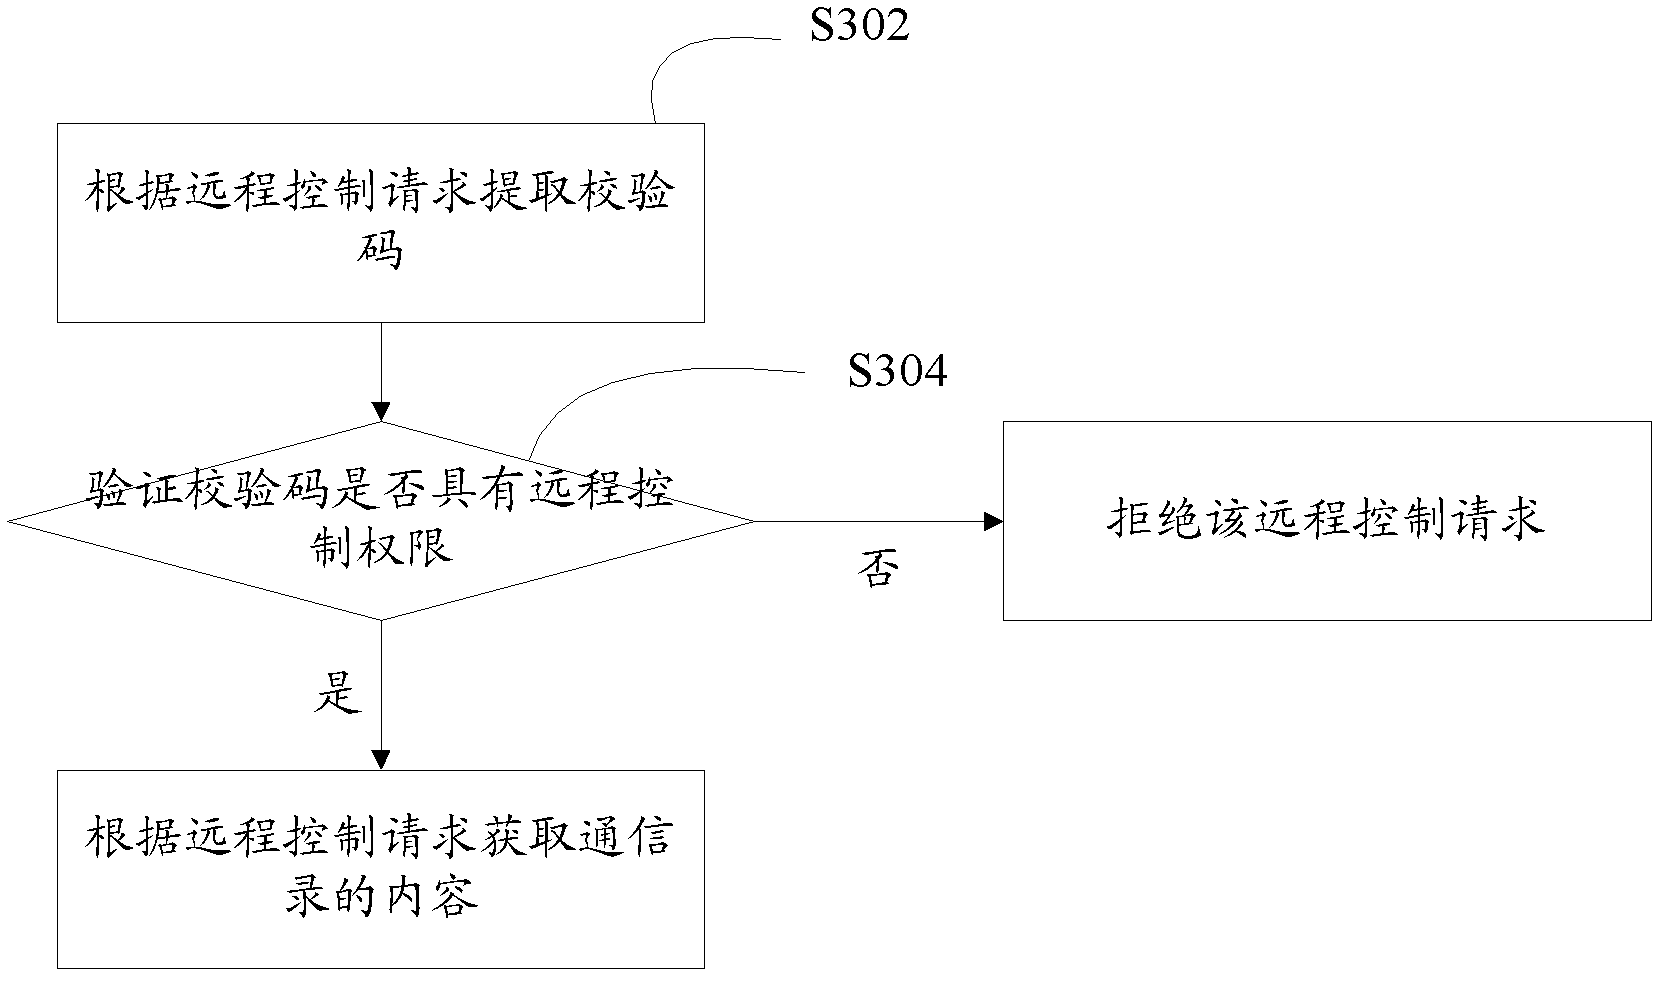 Mobile terminal, and method for address book remote sharing based on mobile terminal